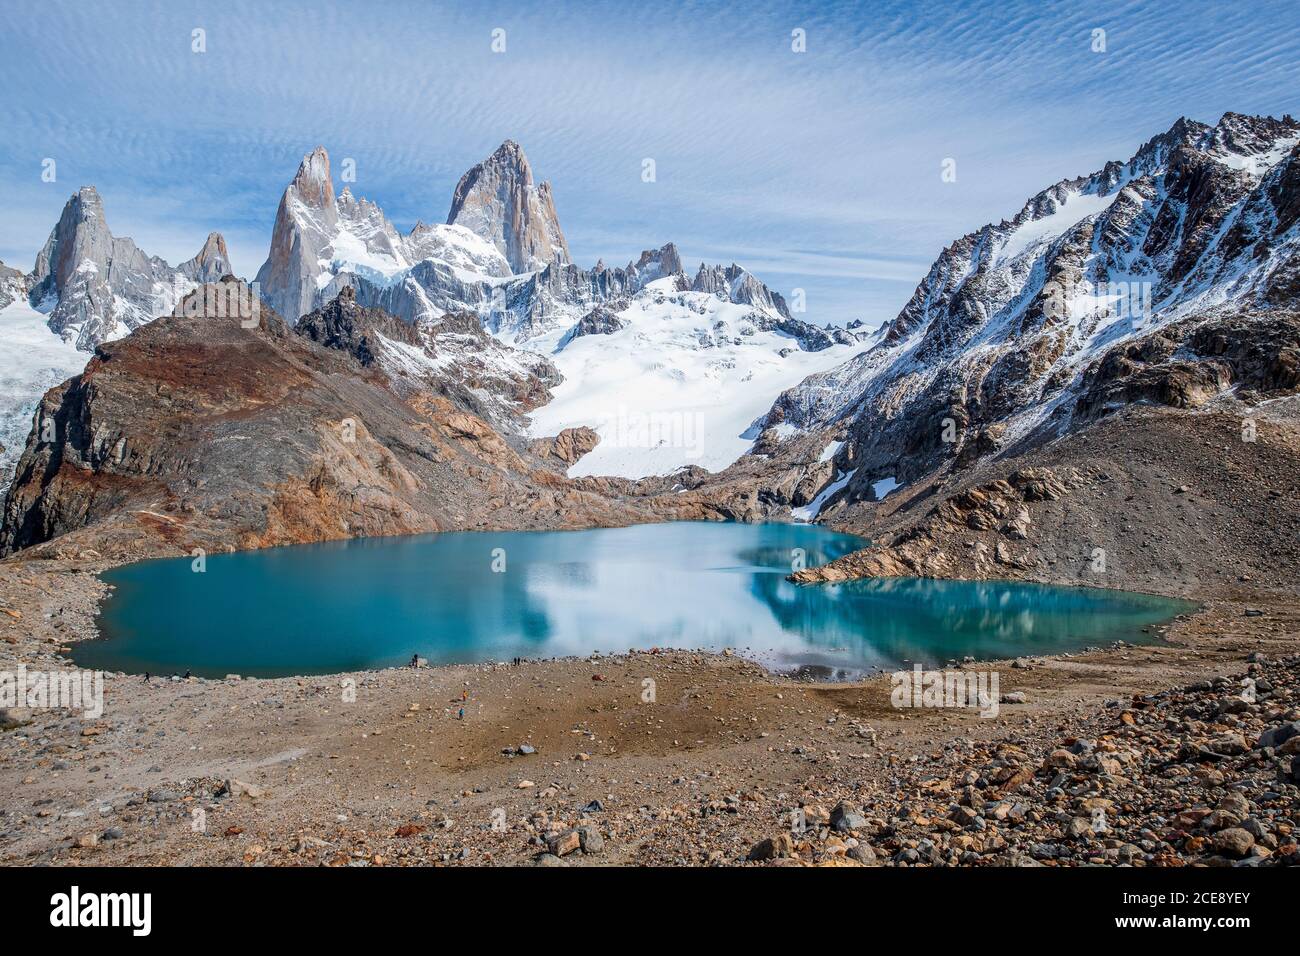 A panoramic view of the Fitz Roy mountain with the blue lake under it. Stock Photo